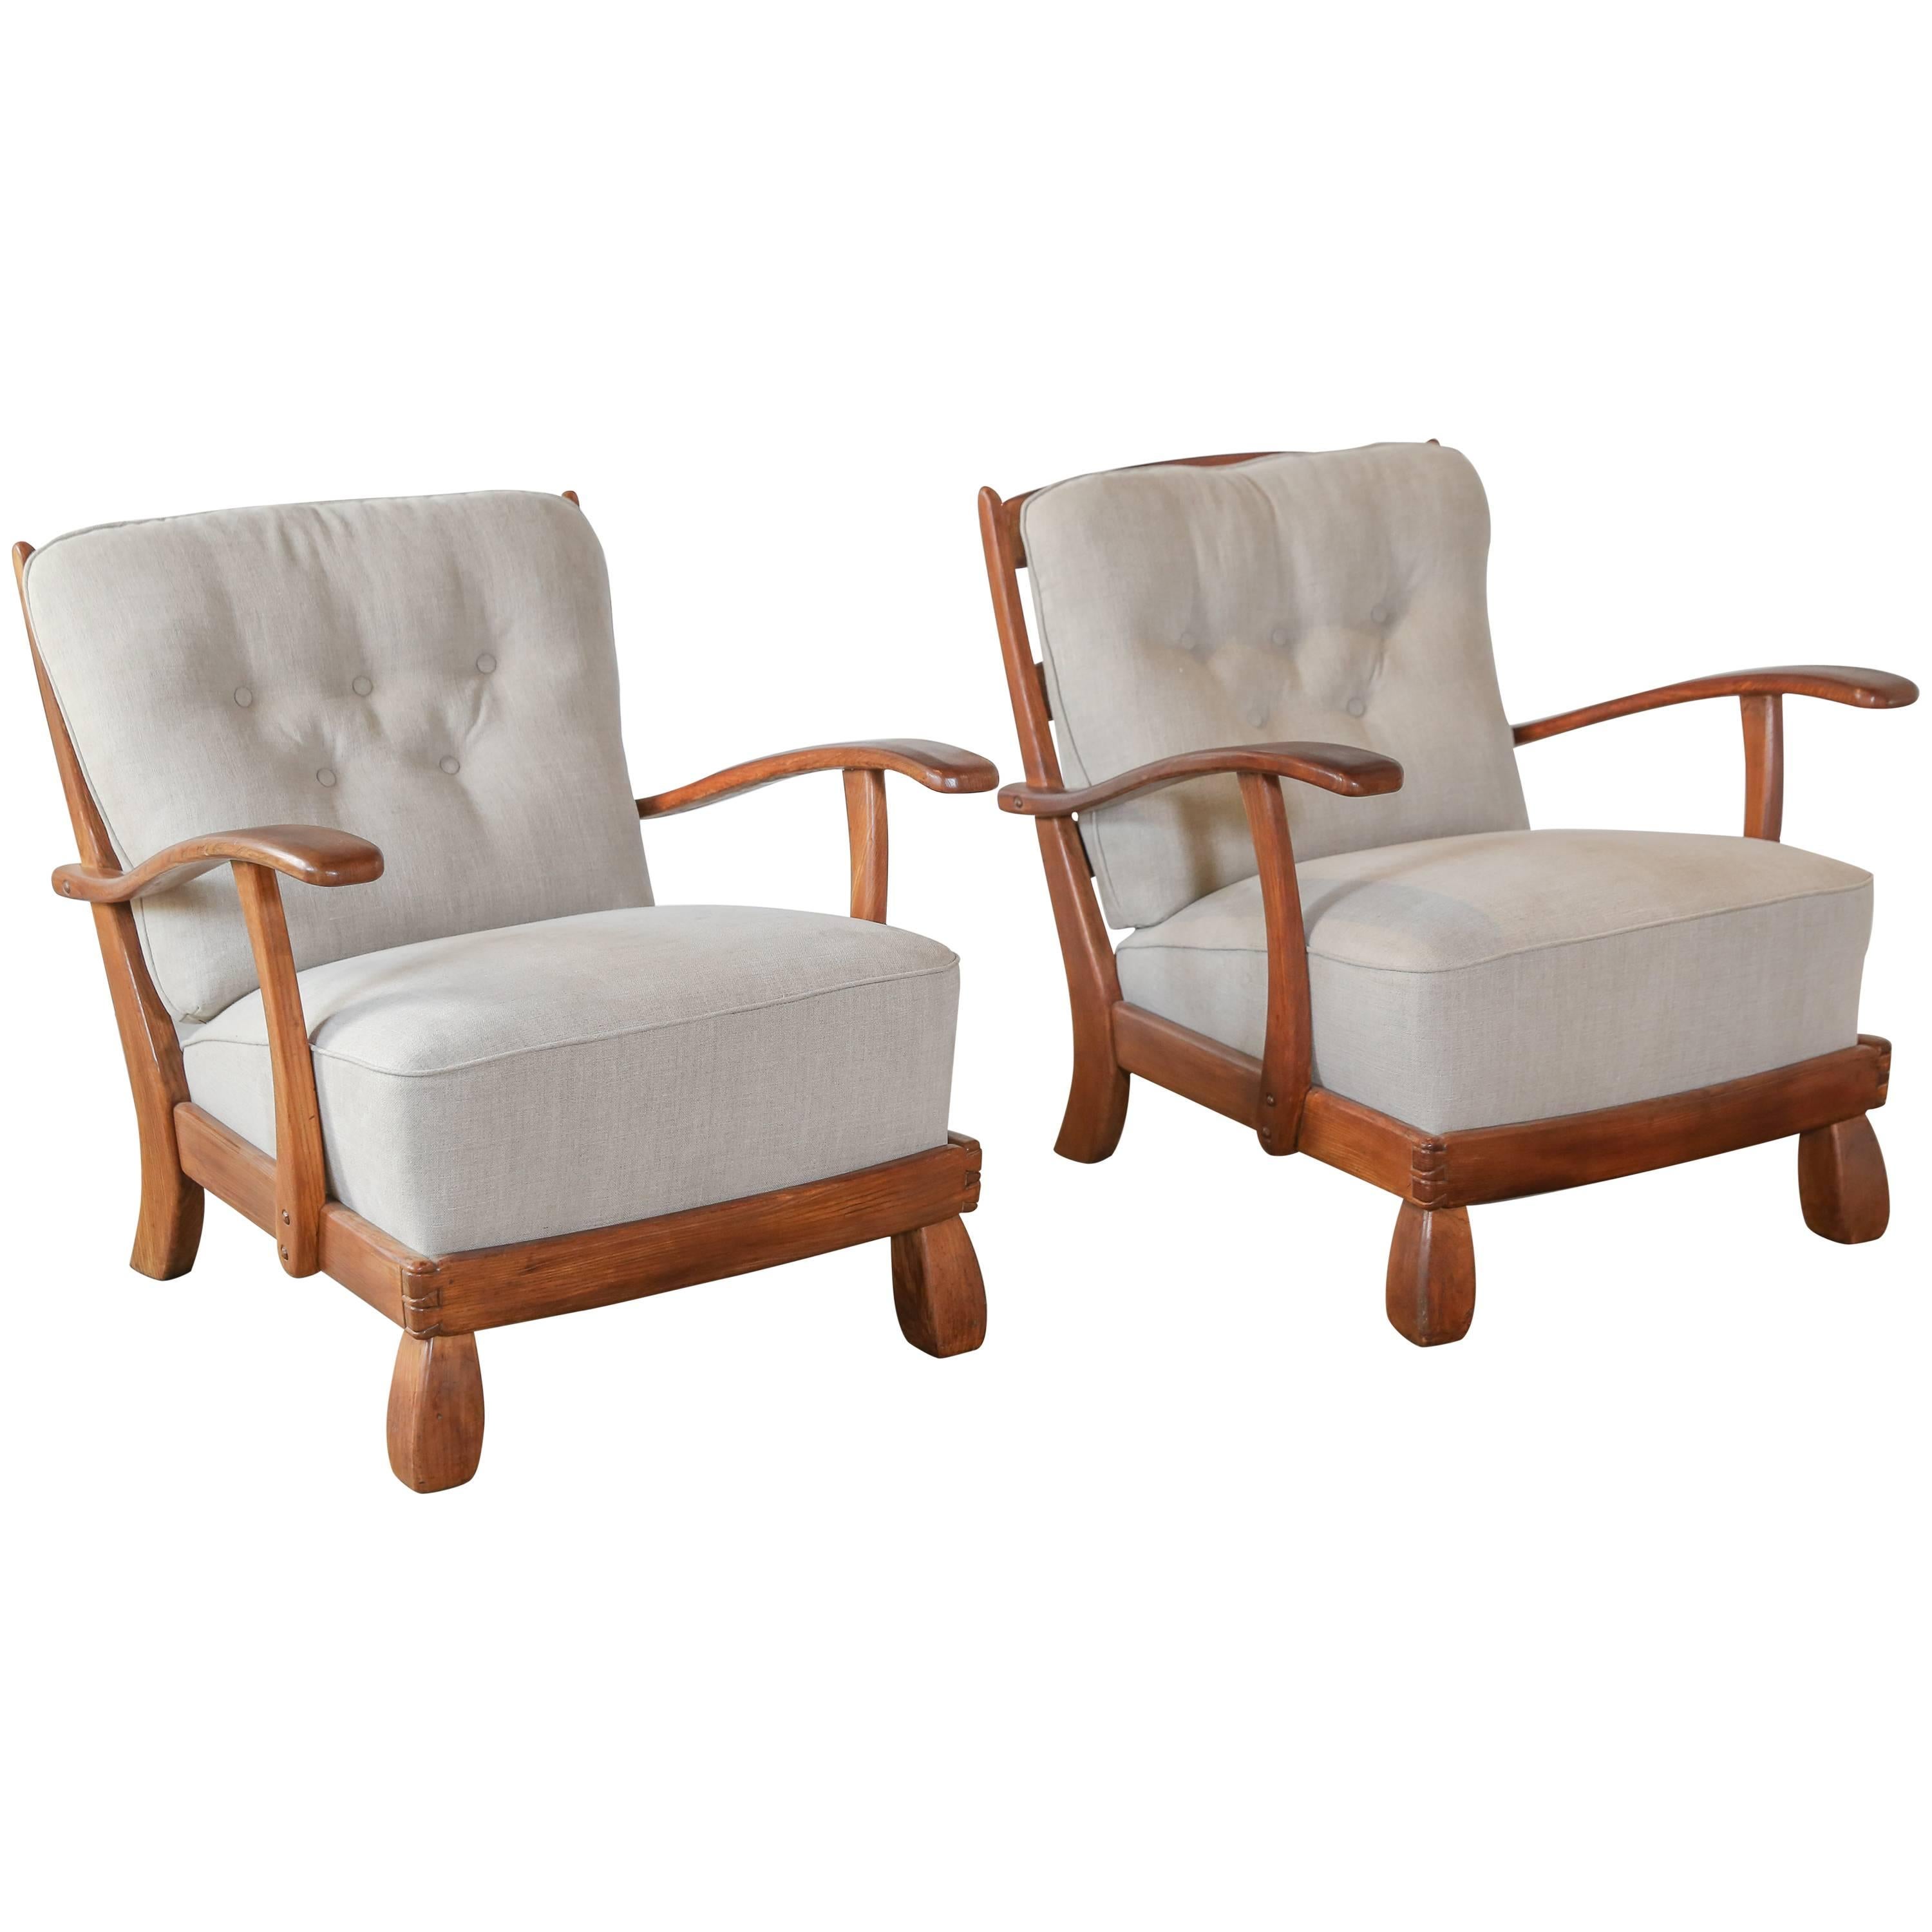 Pair of 1960s Chairs